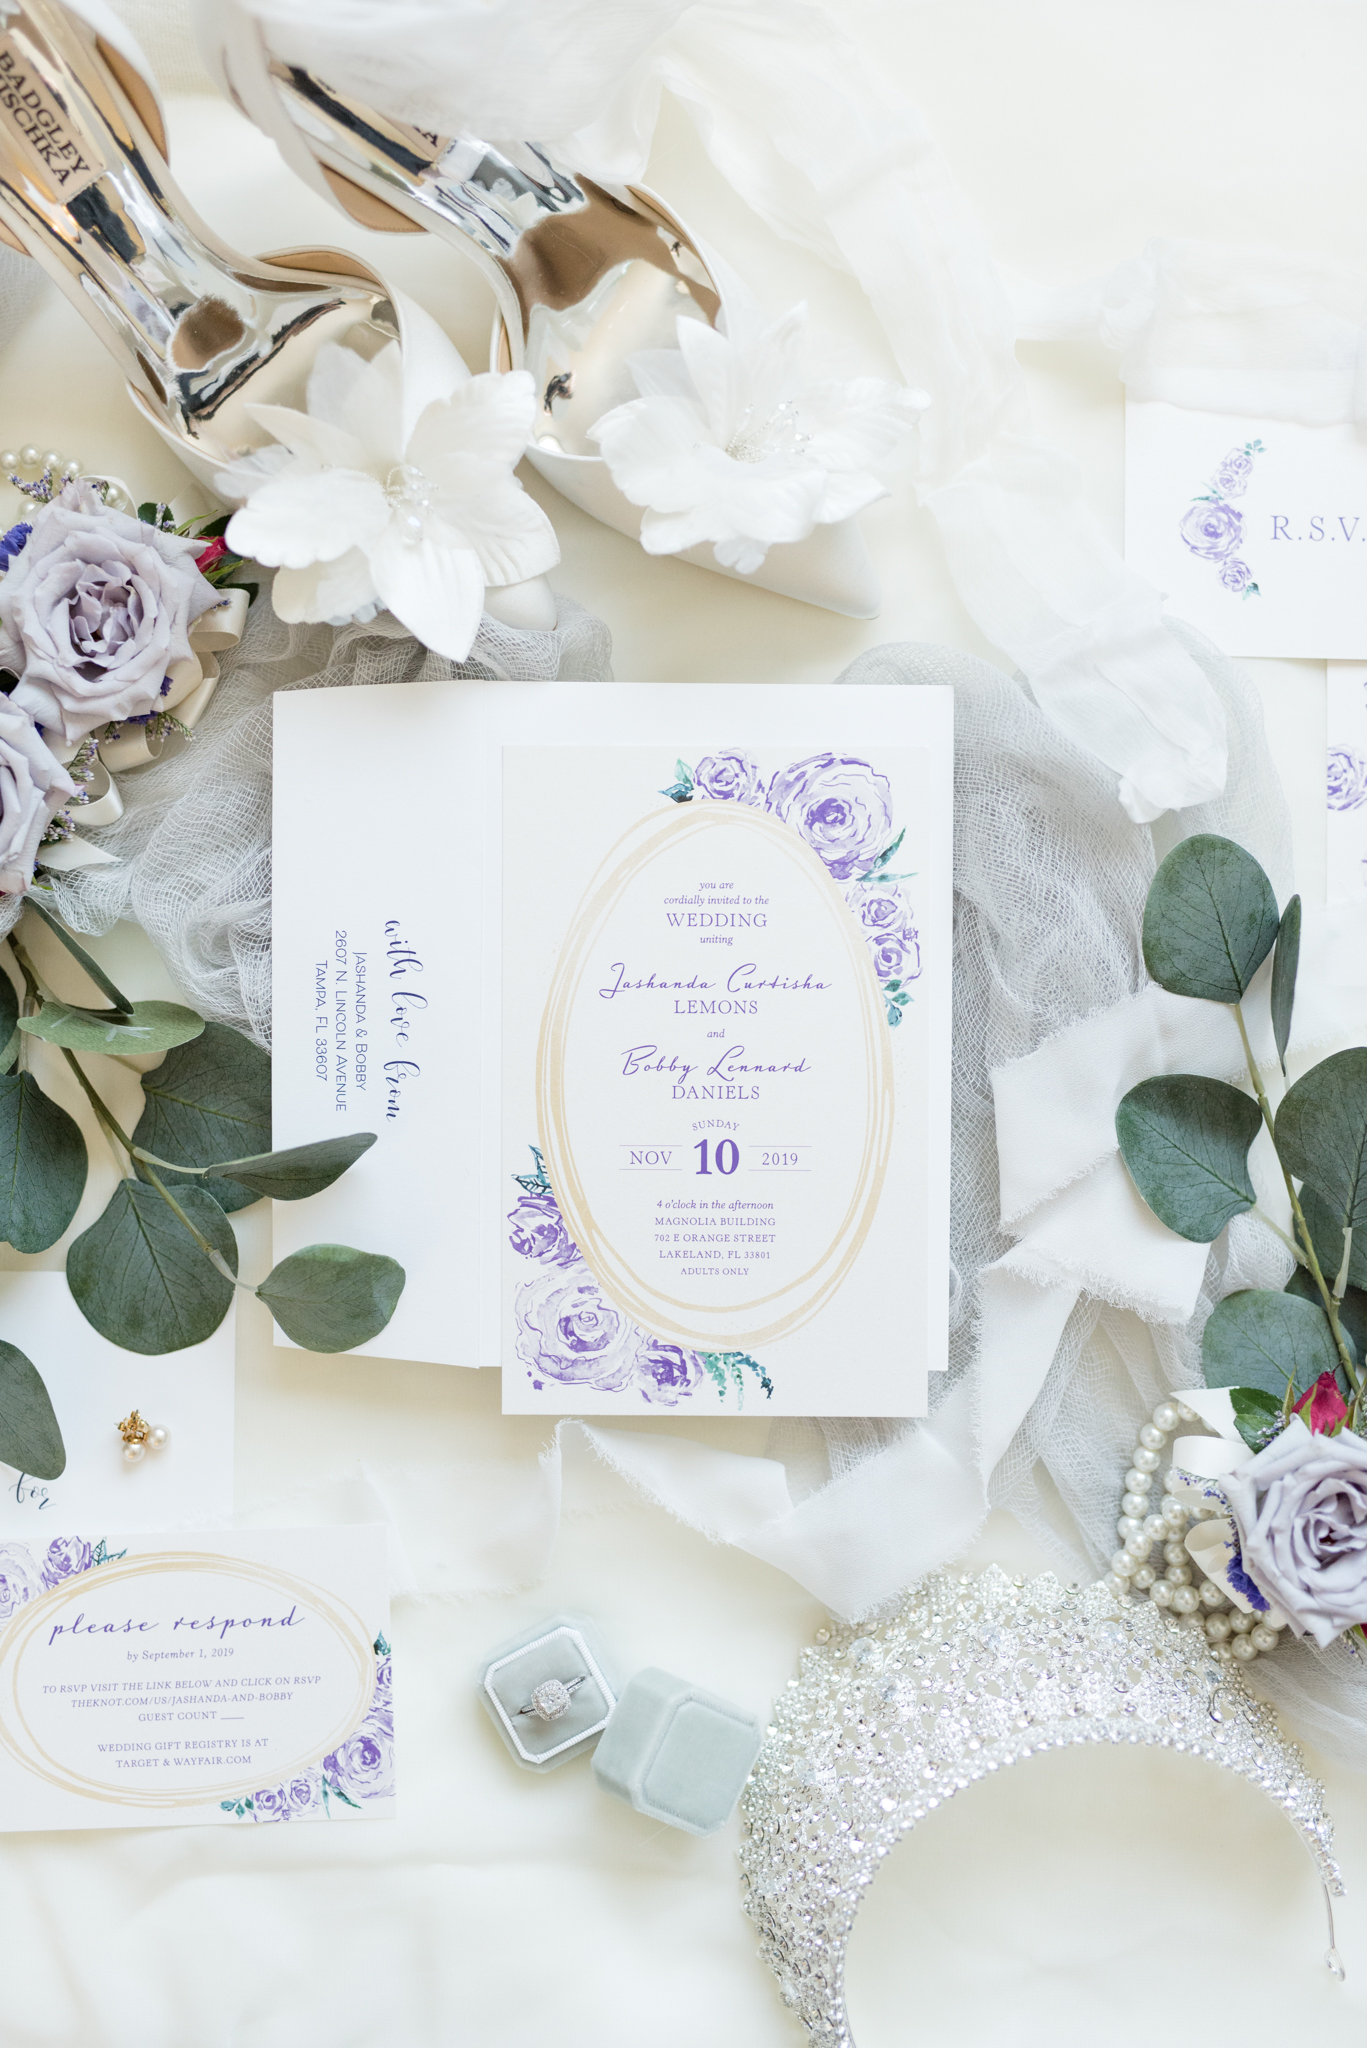 Wedding invitation suite sits with bridal details.